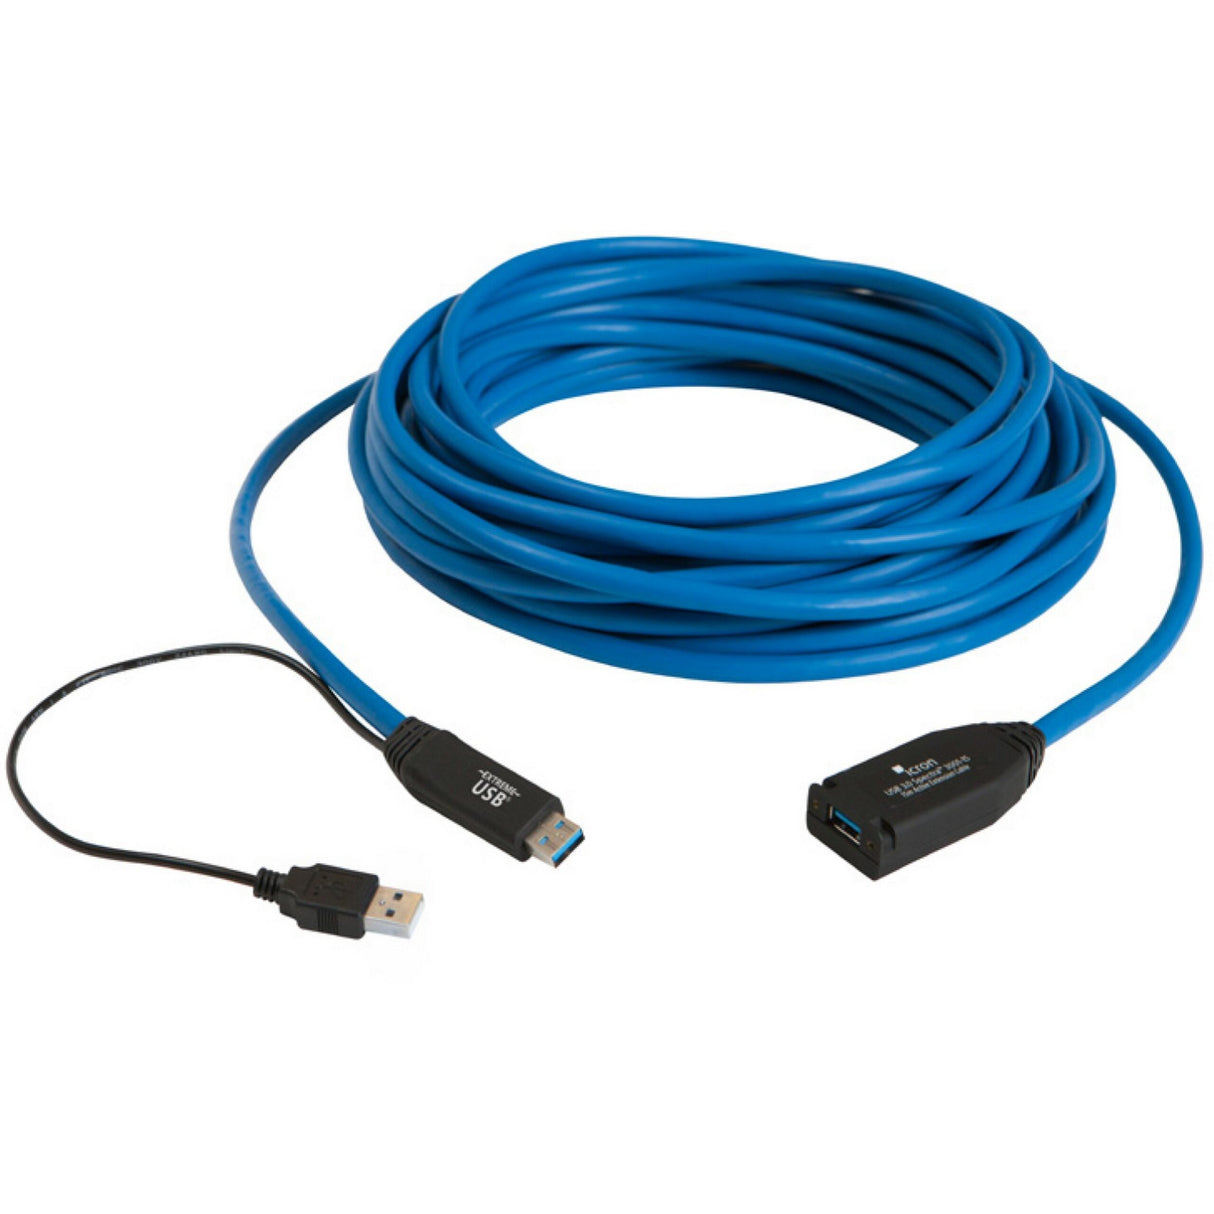 Icron 3001-15 USB 3.0 1-Port Active Copper Extension Cable, 15-Meter